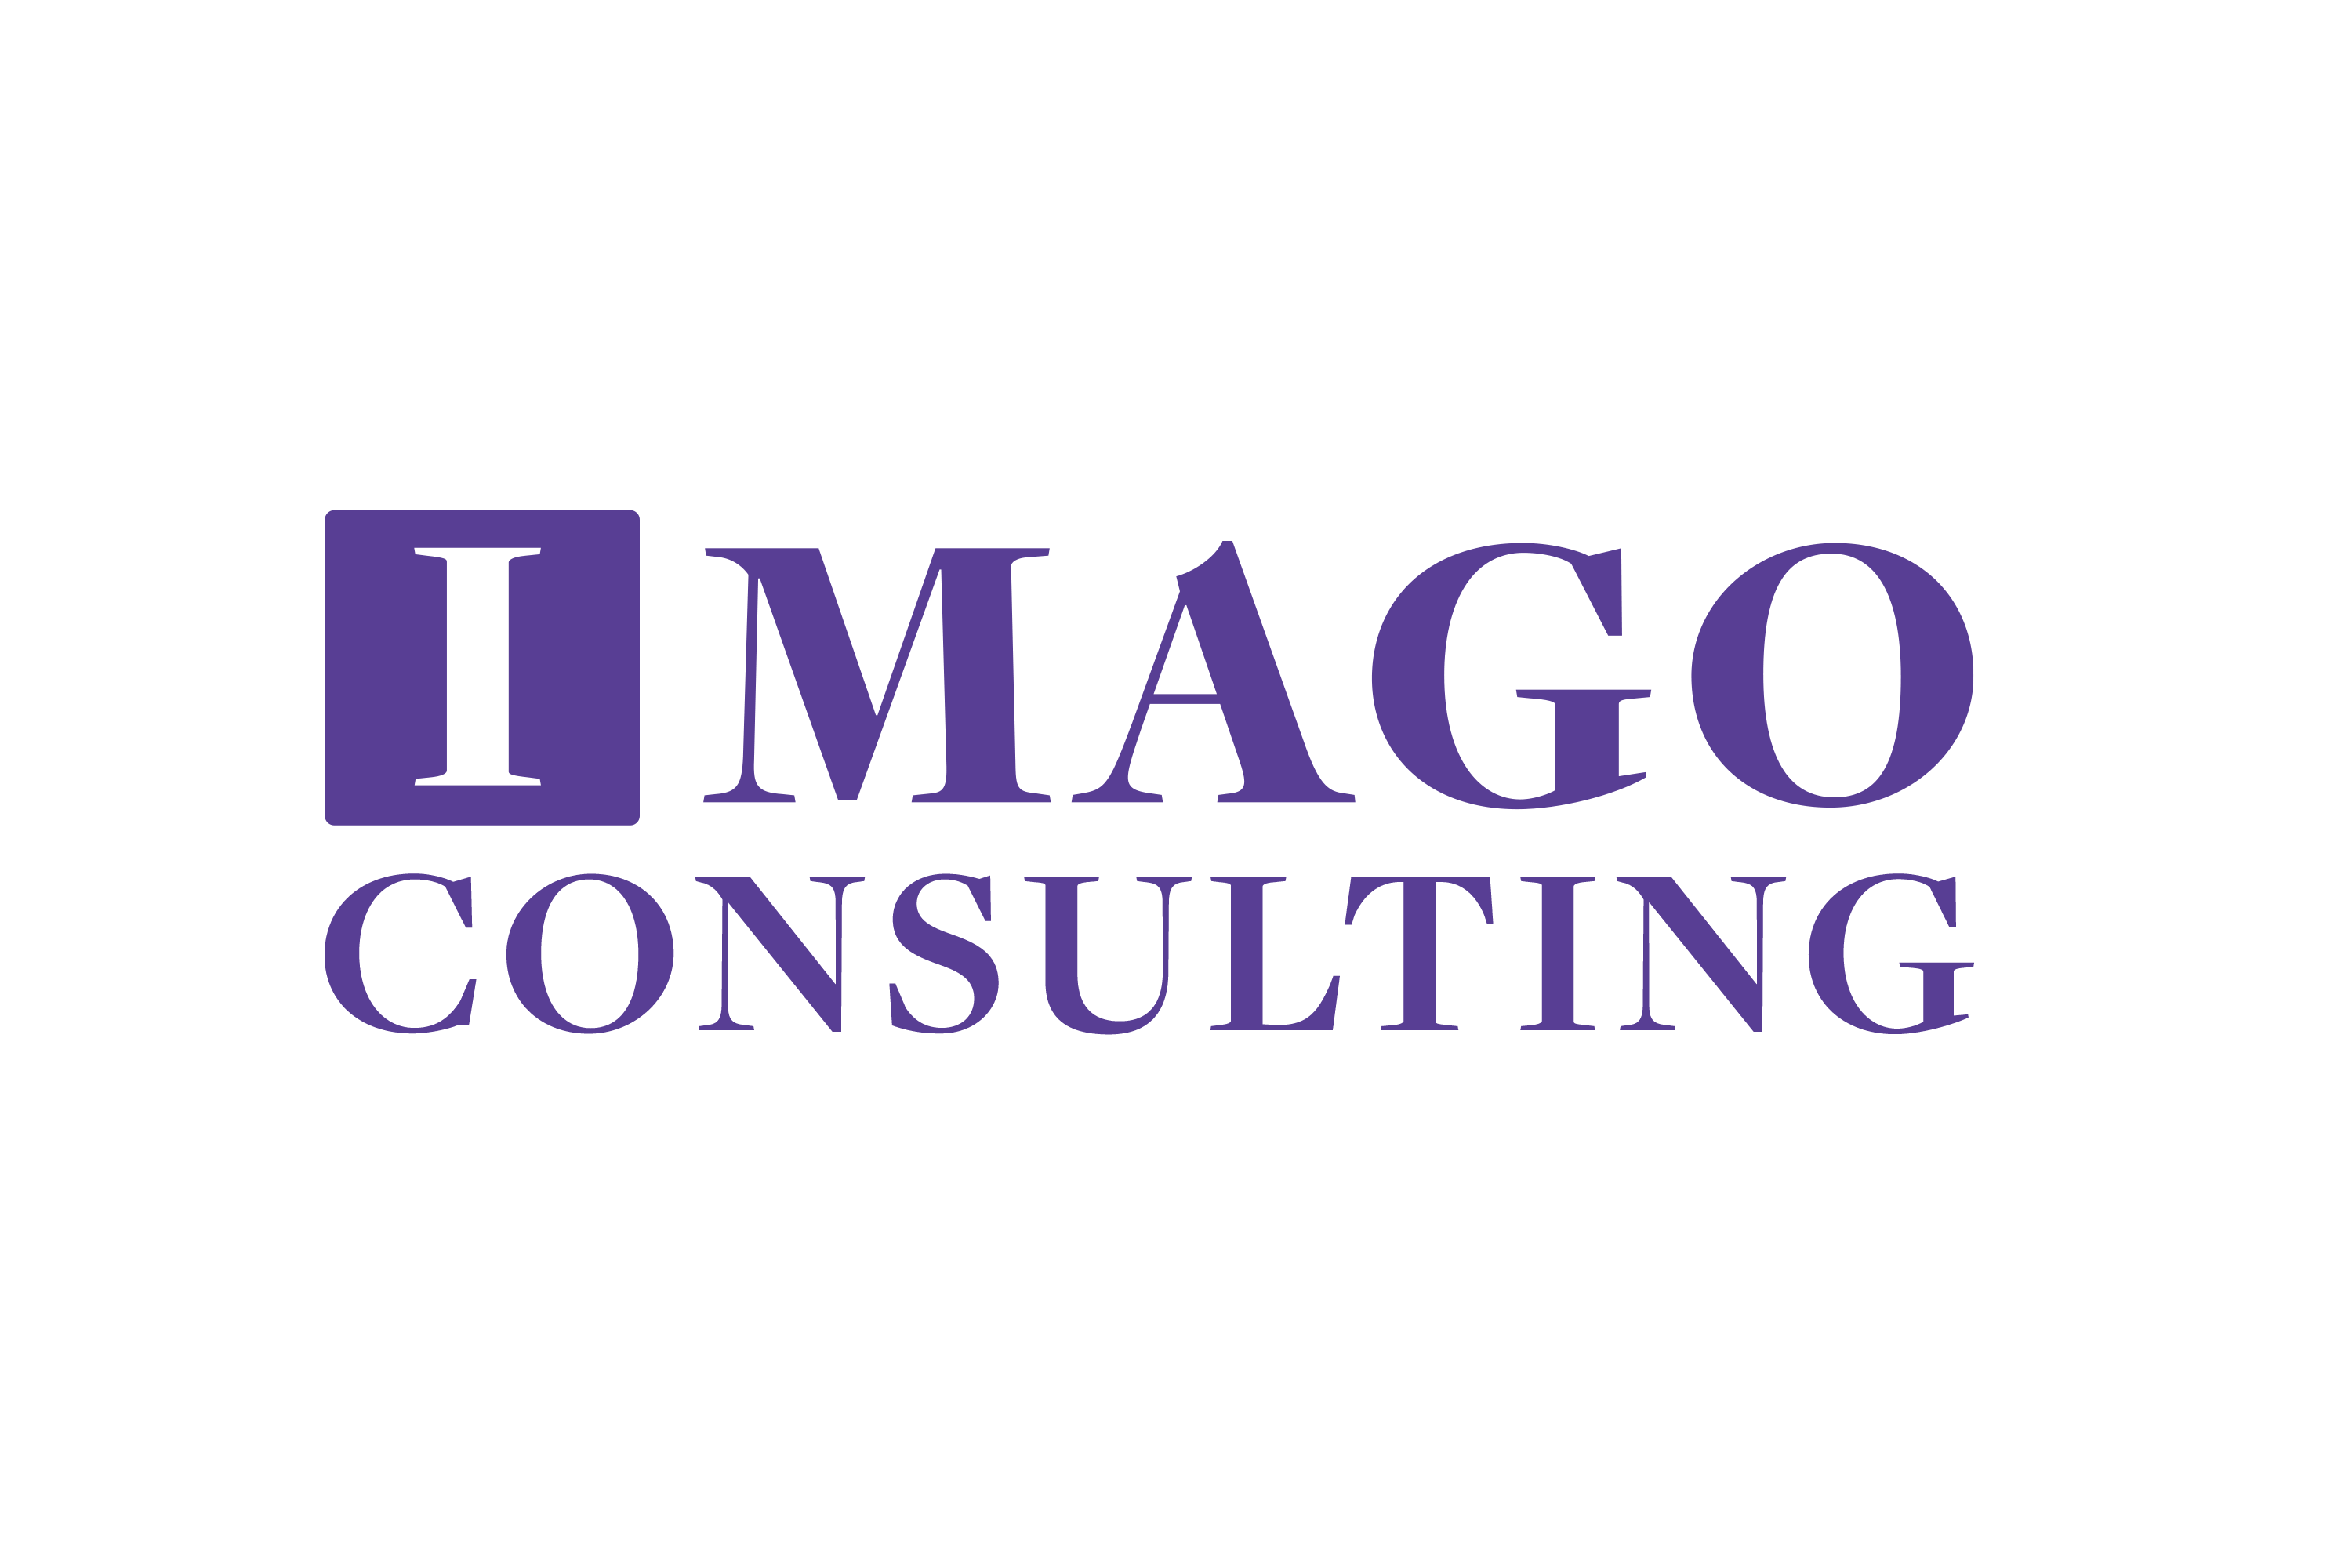 Imago Consulting Stacked Purple - Website Placeholder - Dave Raley